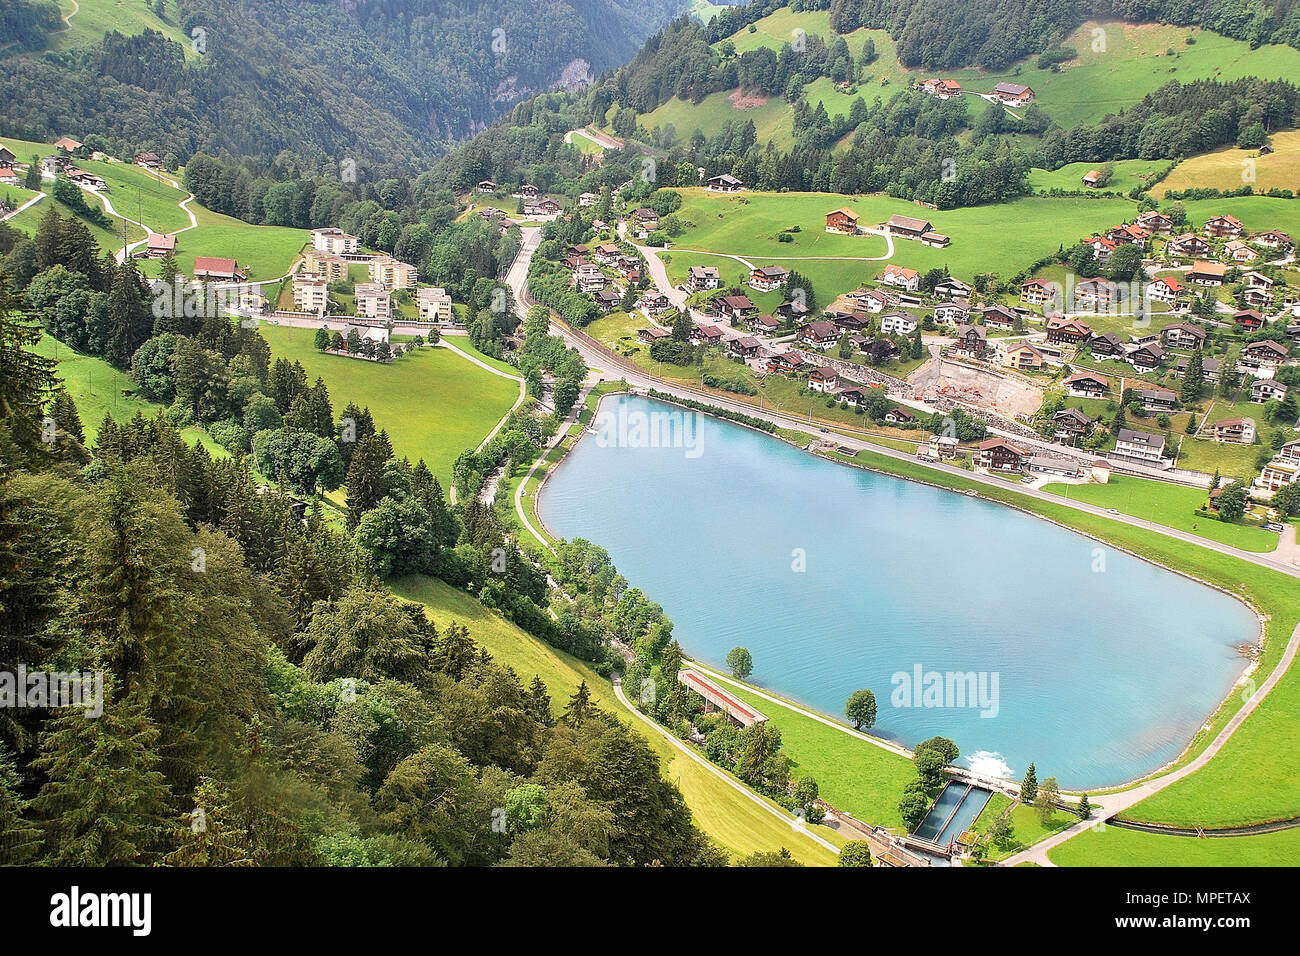 Lake Eugenisee, Engelberg in the canton of Obwalden, Switzerland Stock Photo